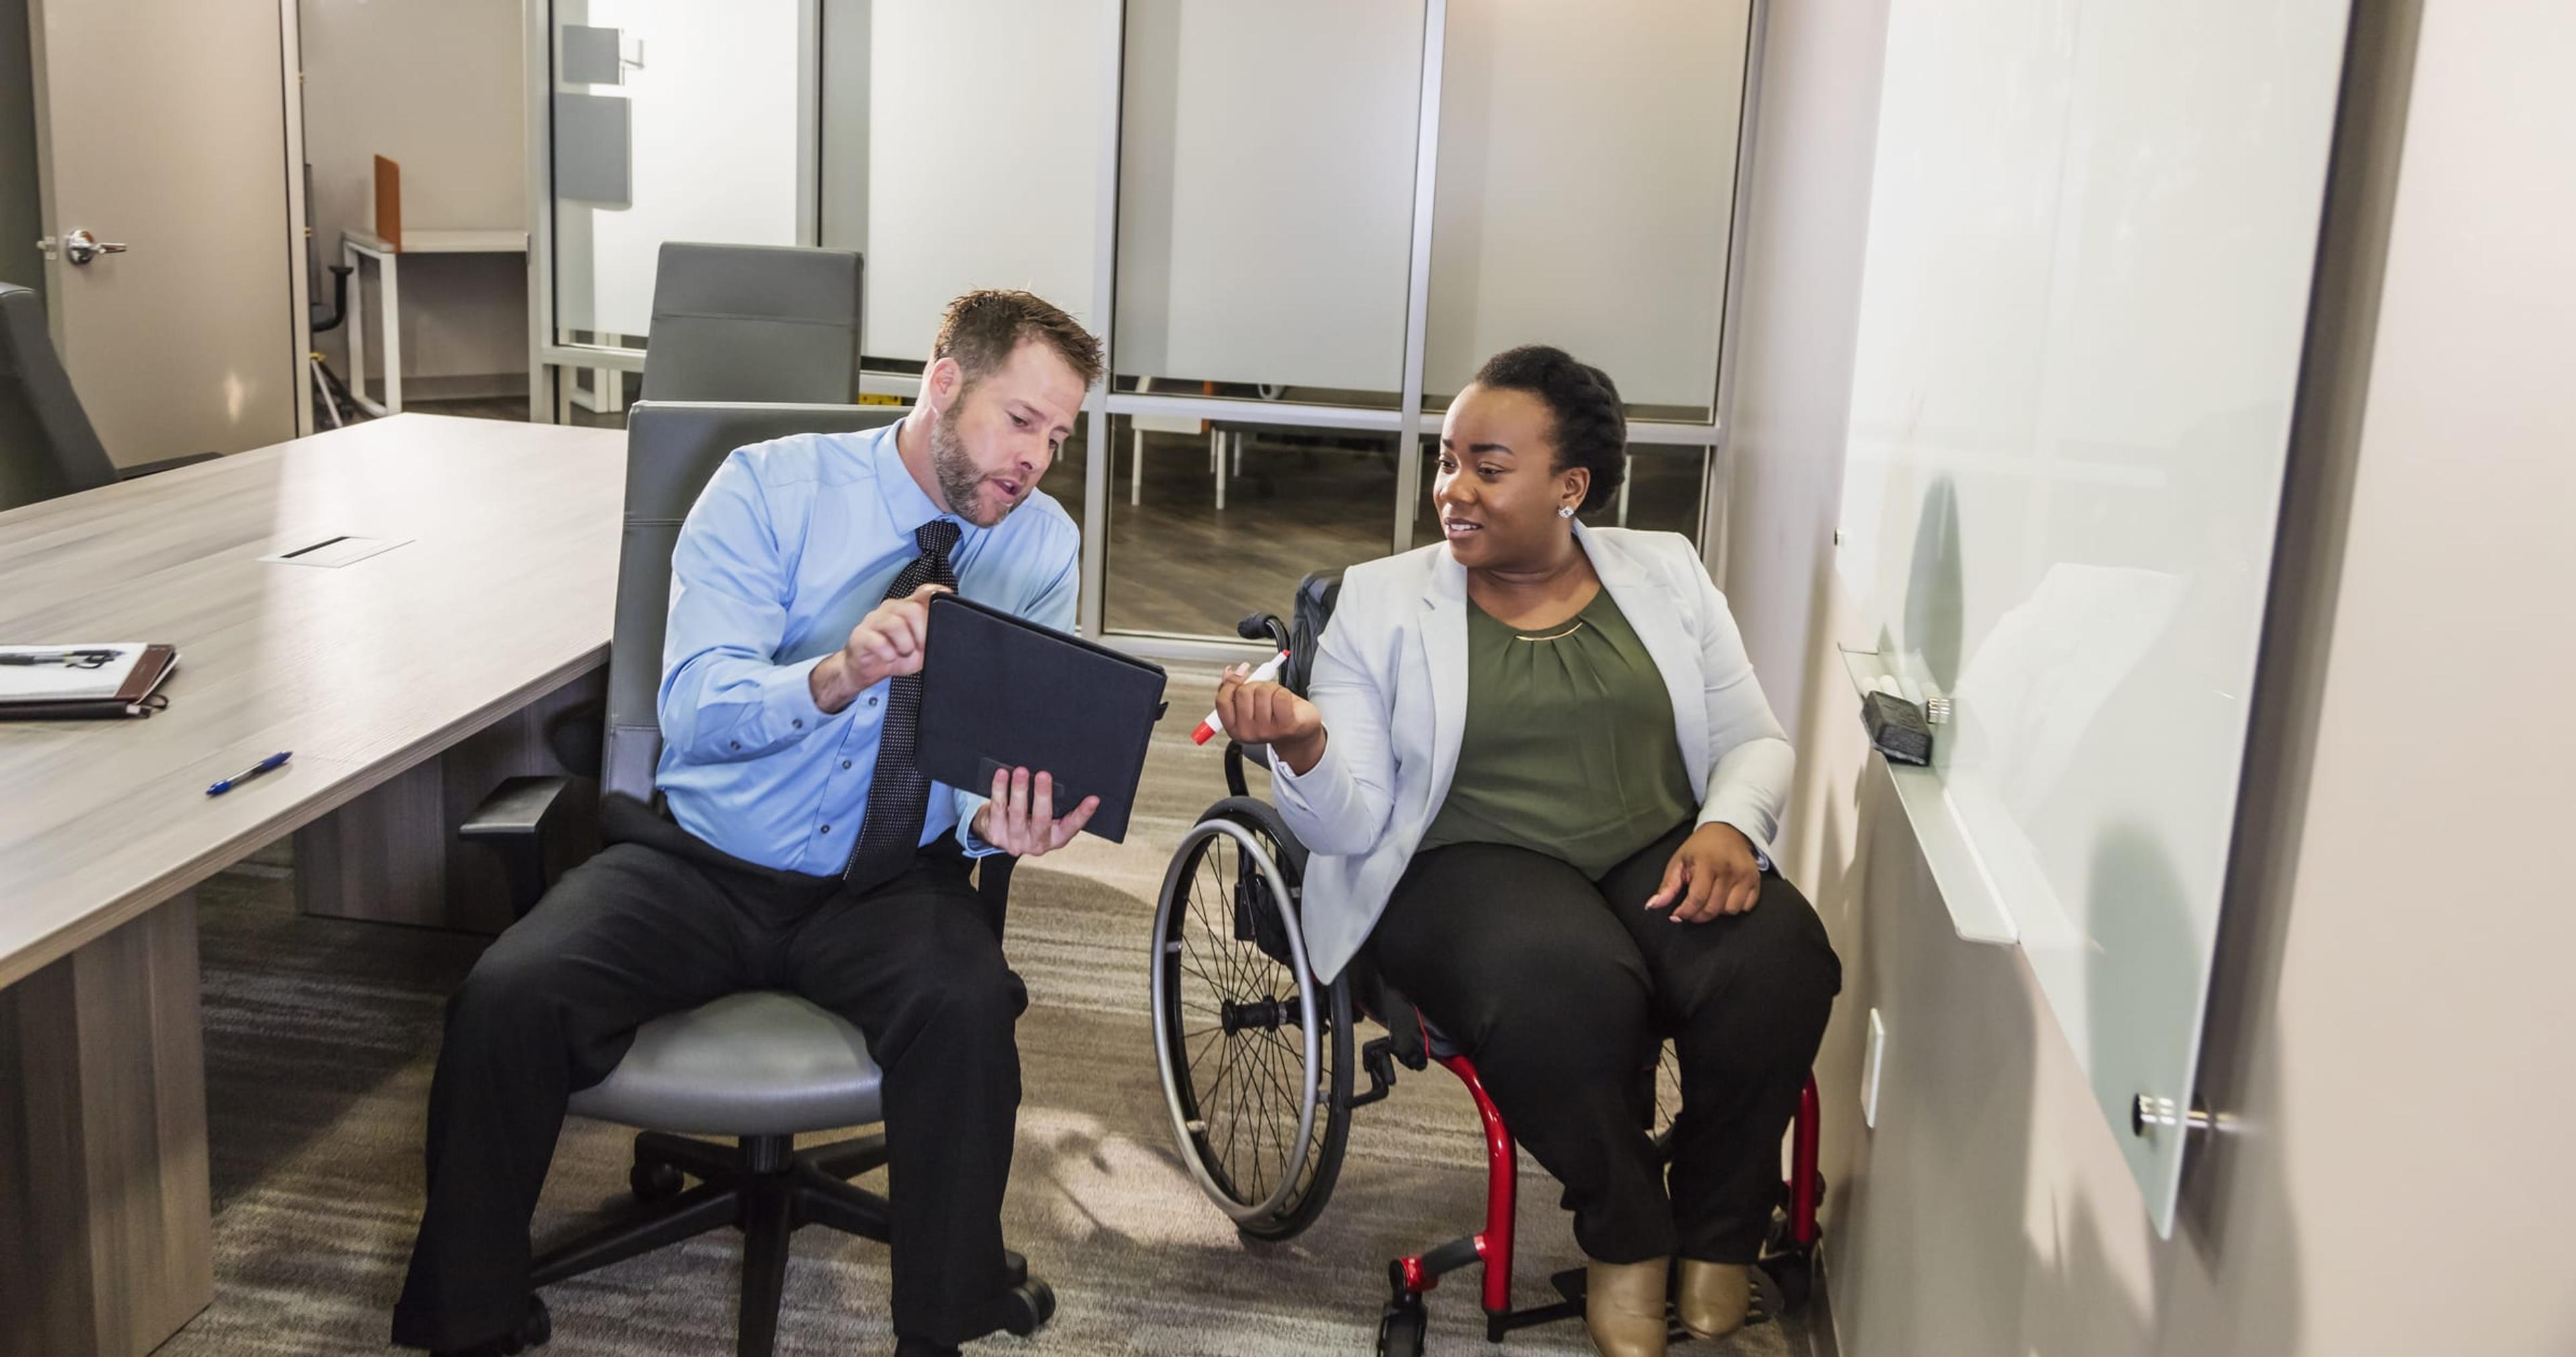 Two multi-ethnic business people in a meeting in an office boardroom. An African-American woman in a wheelchair is writing on a white board. Her coworker, a businessman wearing a shirt and tie, is holding up his notes for her to see. Both workers are in their 30s.